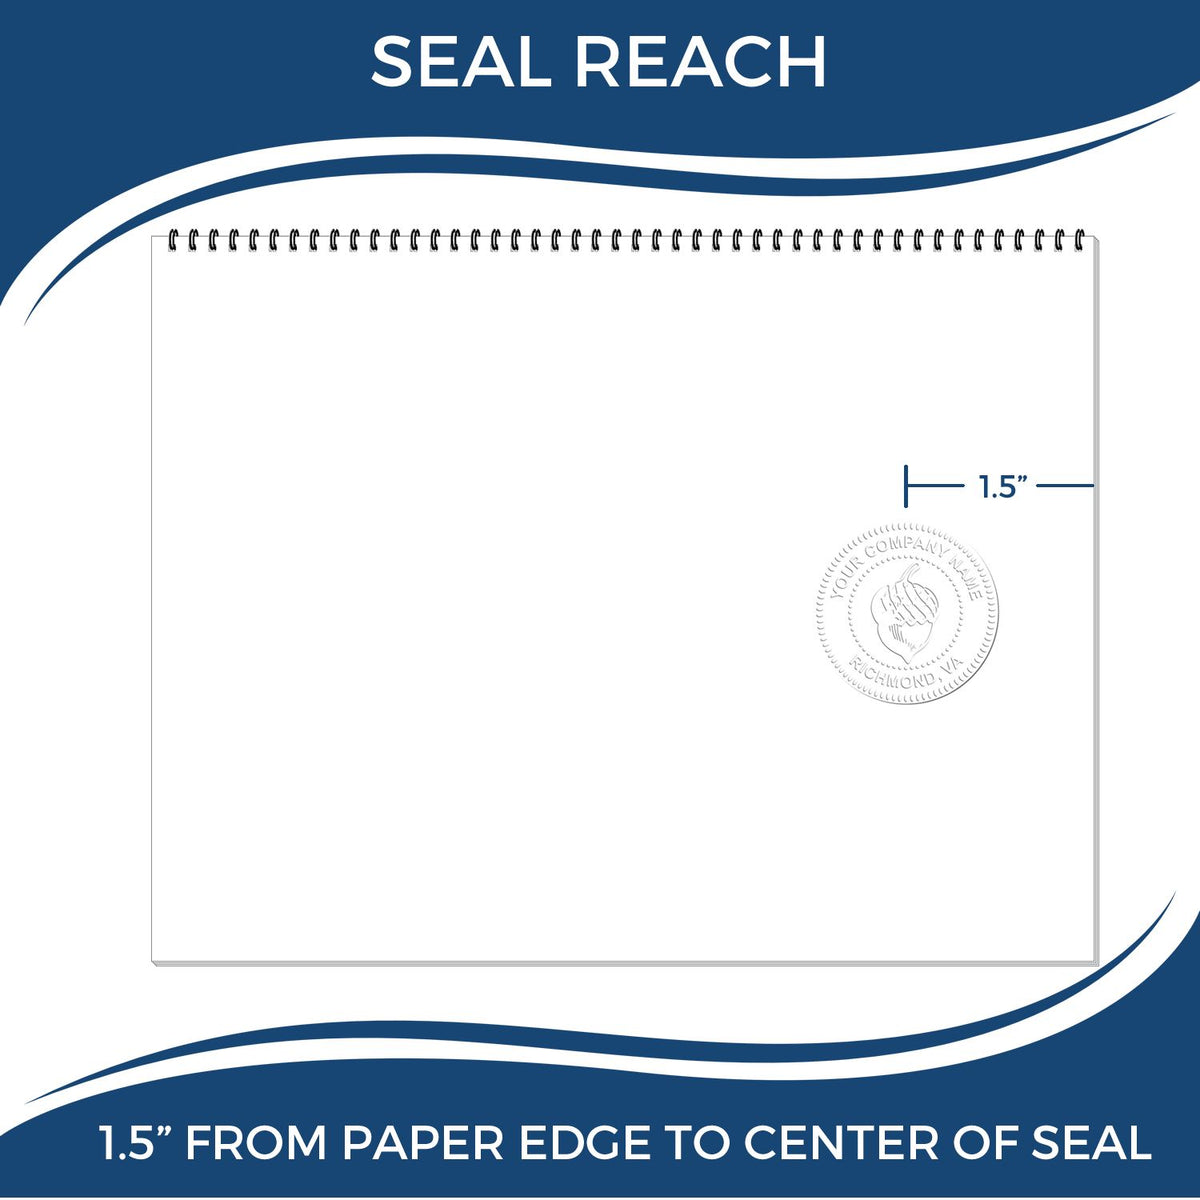 An infographic showing the seal reach which is represented by a ruler and a miniature seal image of the State of New York Soft Land Surveyor Embossing Seal